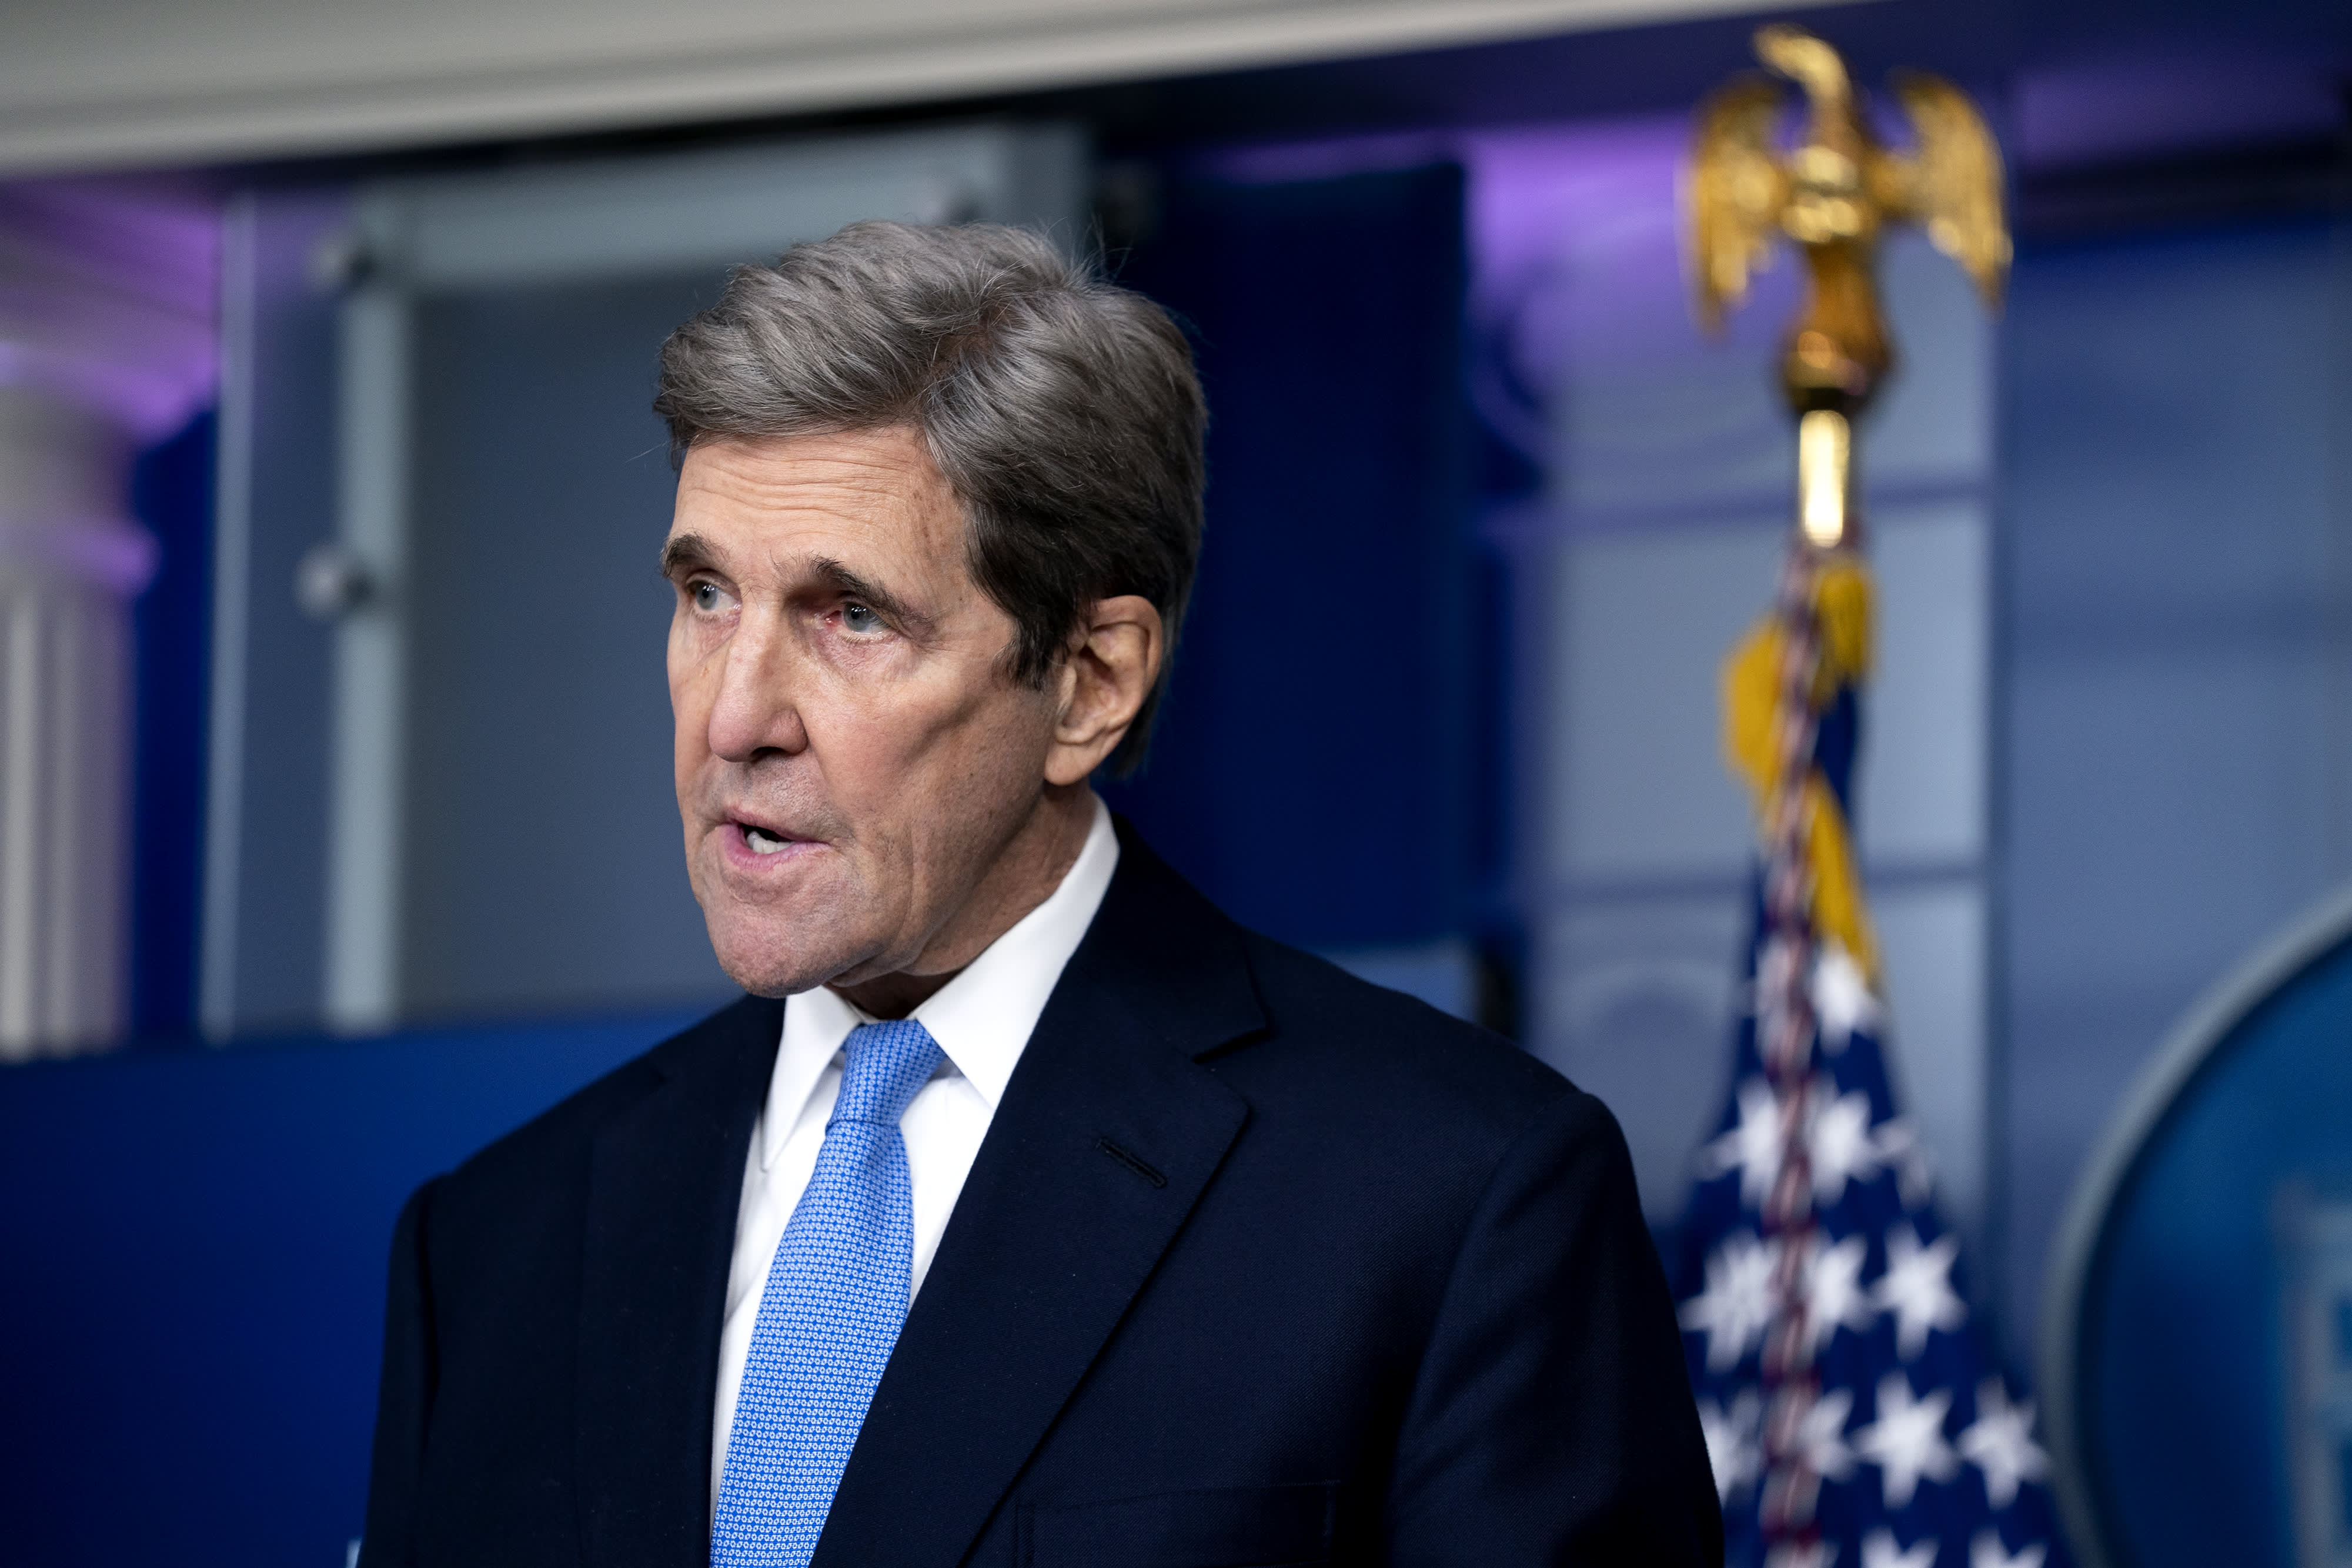 Biden’s climate plan ‘is not against China’: John Kerry